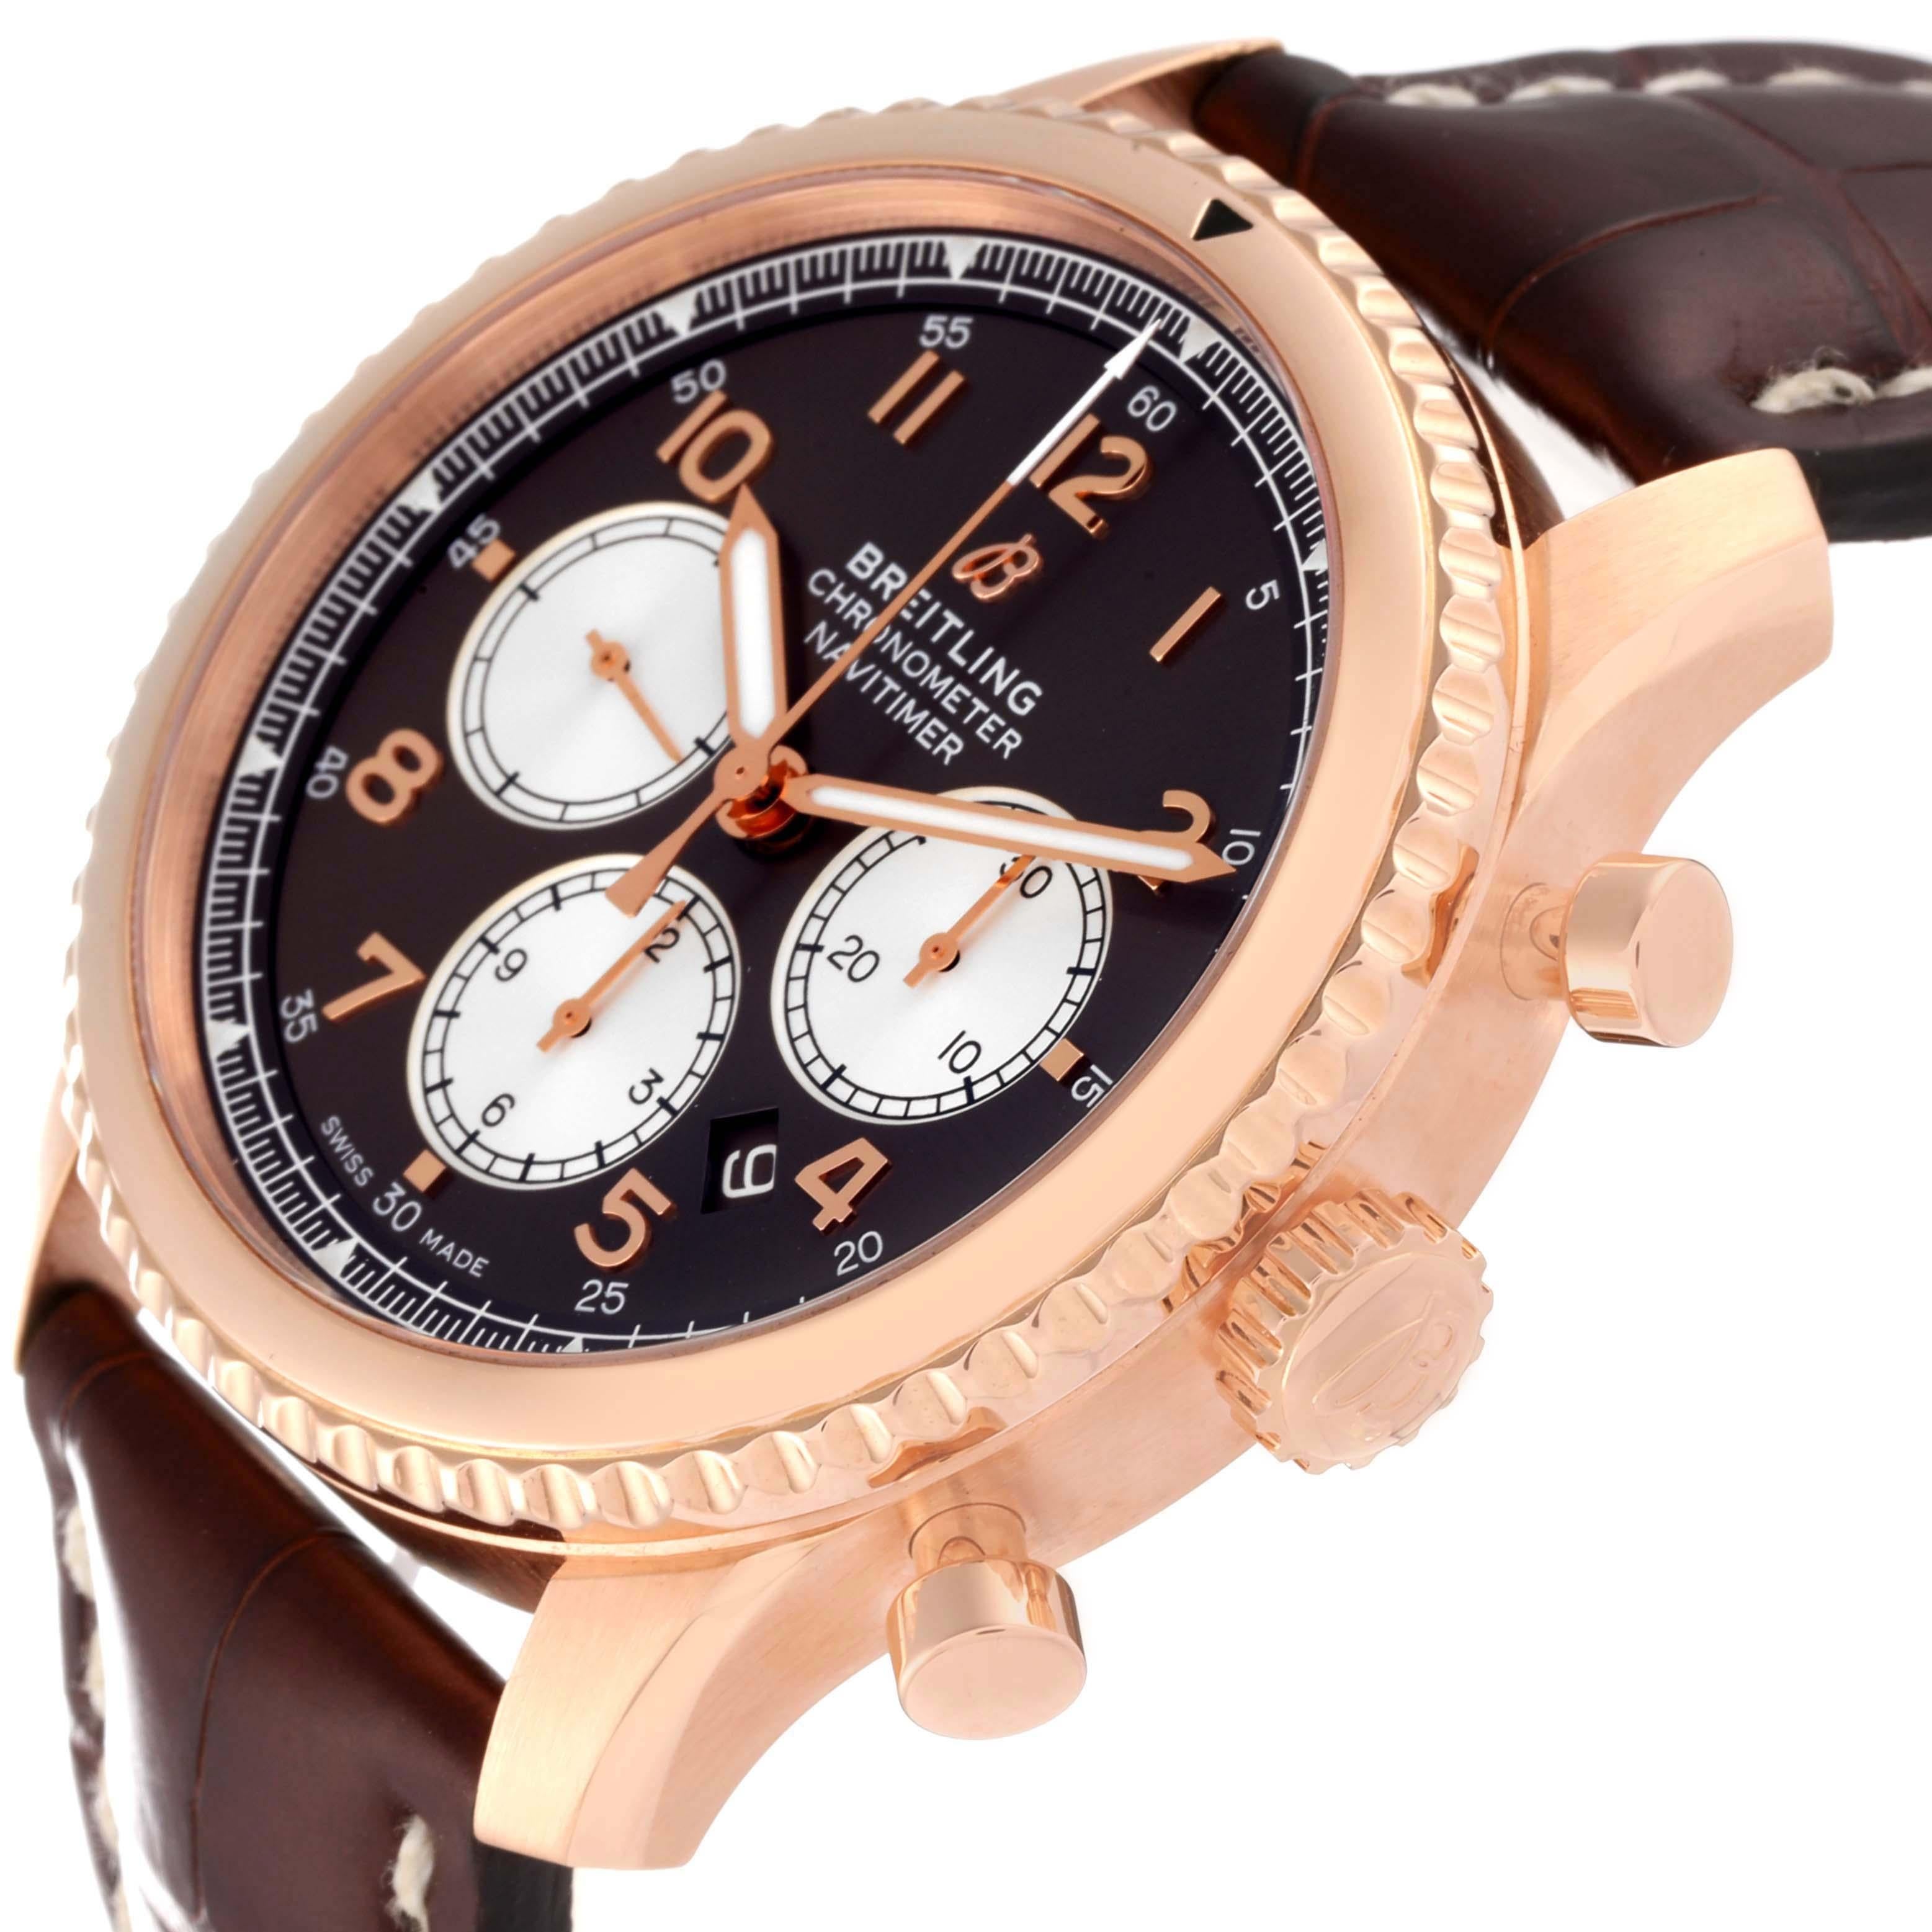 Breitling Navitimer Aviator 8 B01 Rose Gold Mens Watch RB0117 Box Card In Excellent Condition For Sale In Atlanta, GA